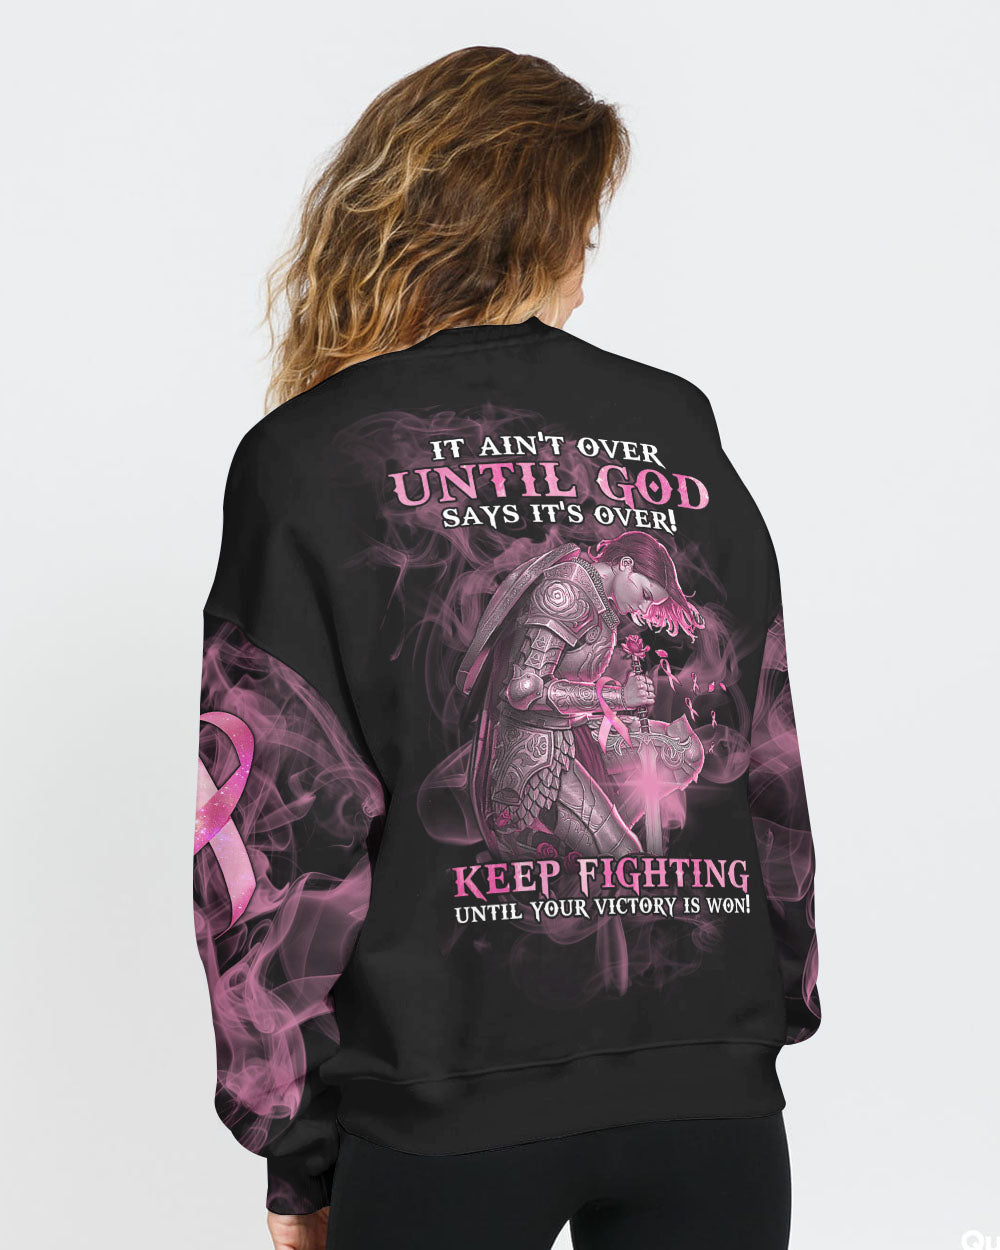 It Ain't Over Until God Says It's Over Women's Breast Cancer Awareness Sweatshirt